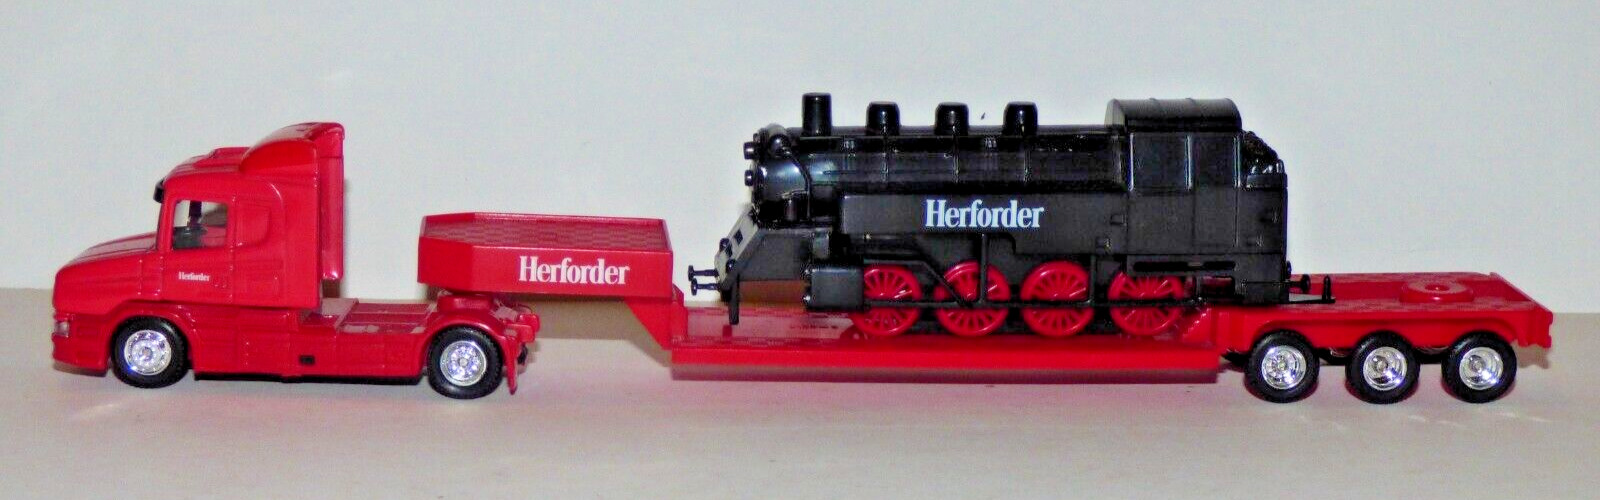 Rarity, 1:87, Scania 124L 400 TL with locomotive, rock basement Herforder, No.040, collection